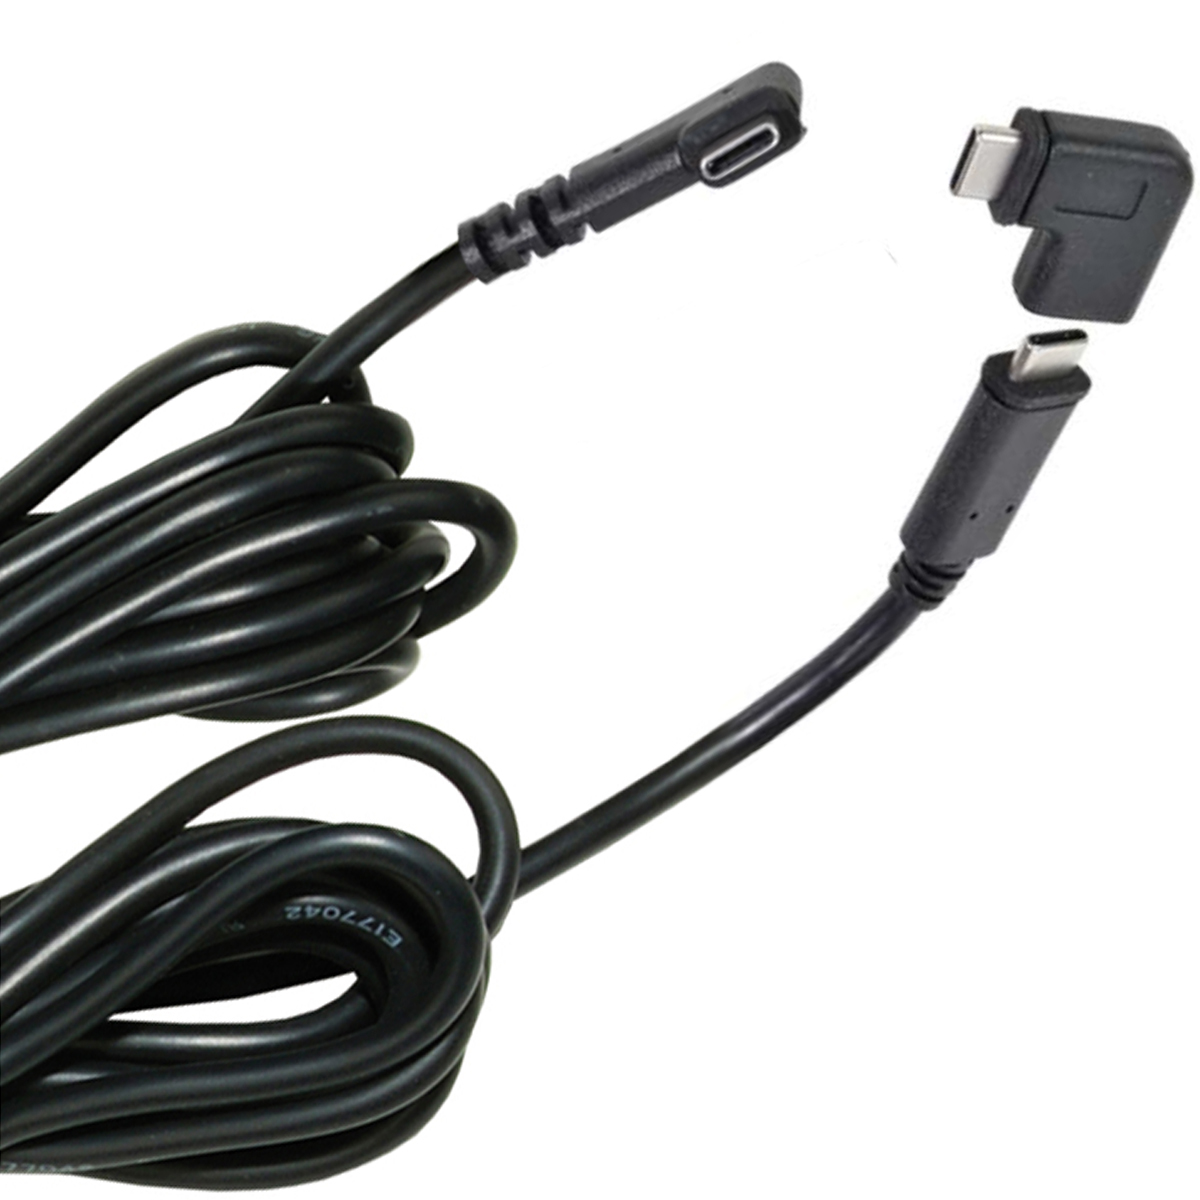 Kessil 90° K-Link USB Cable - 3 m